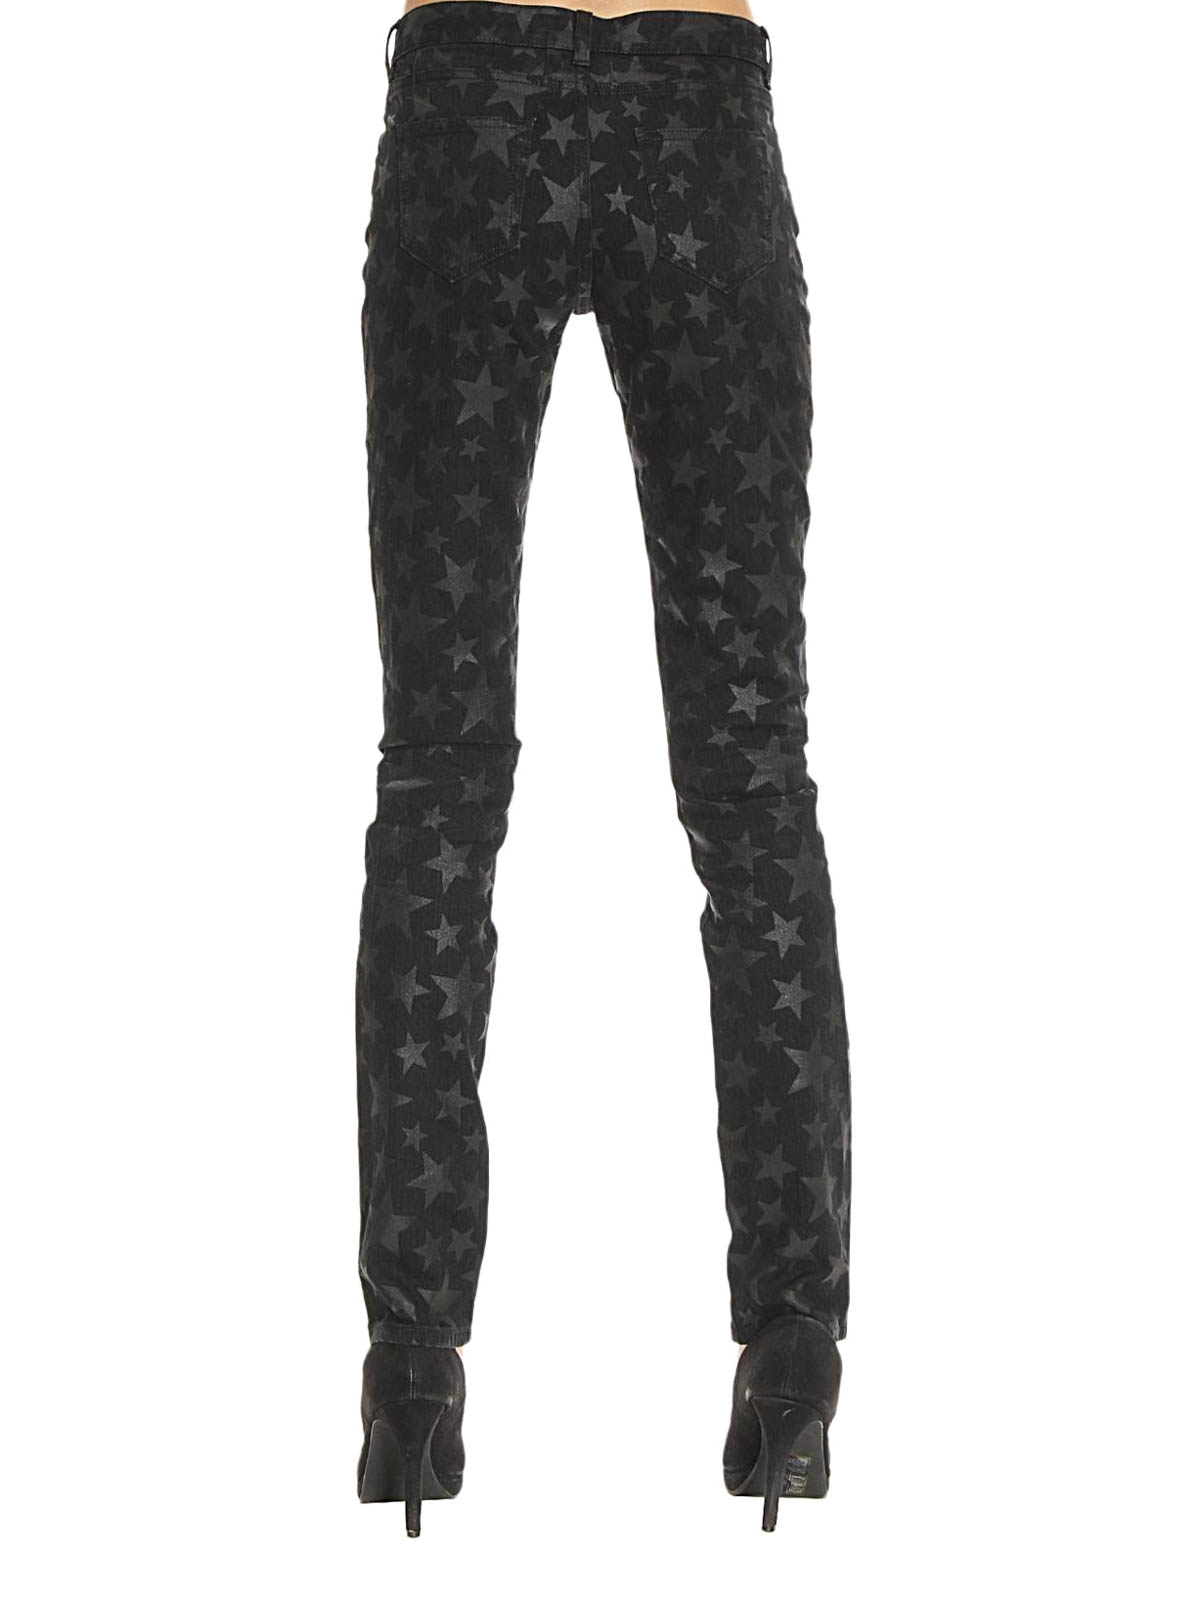 black jeans with stars